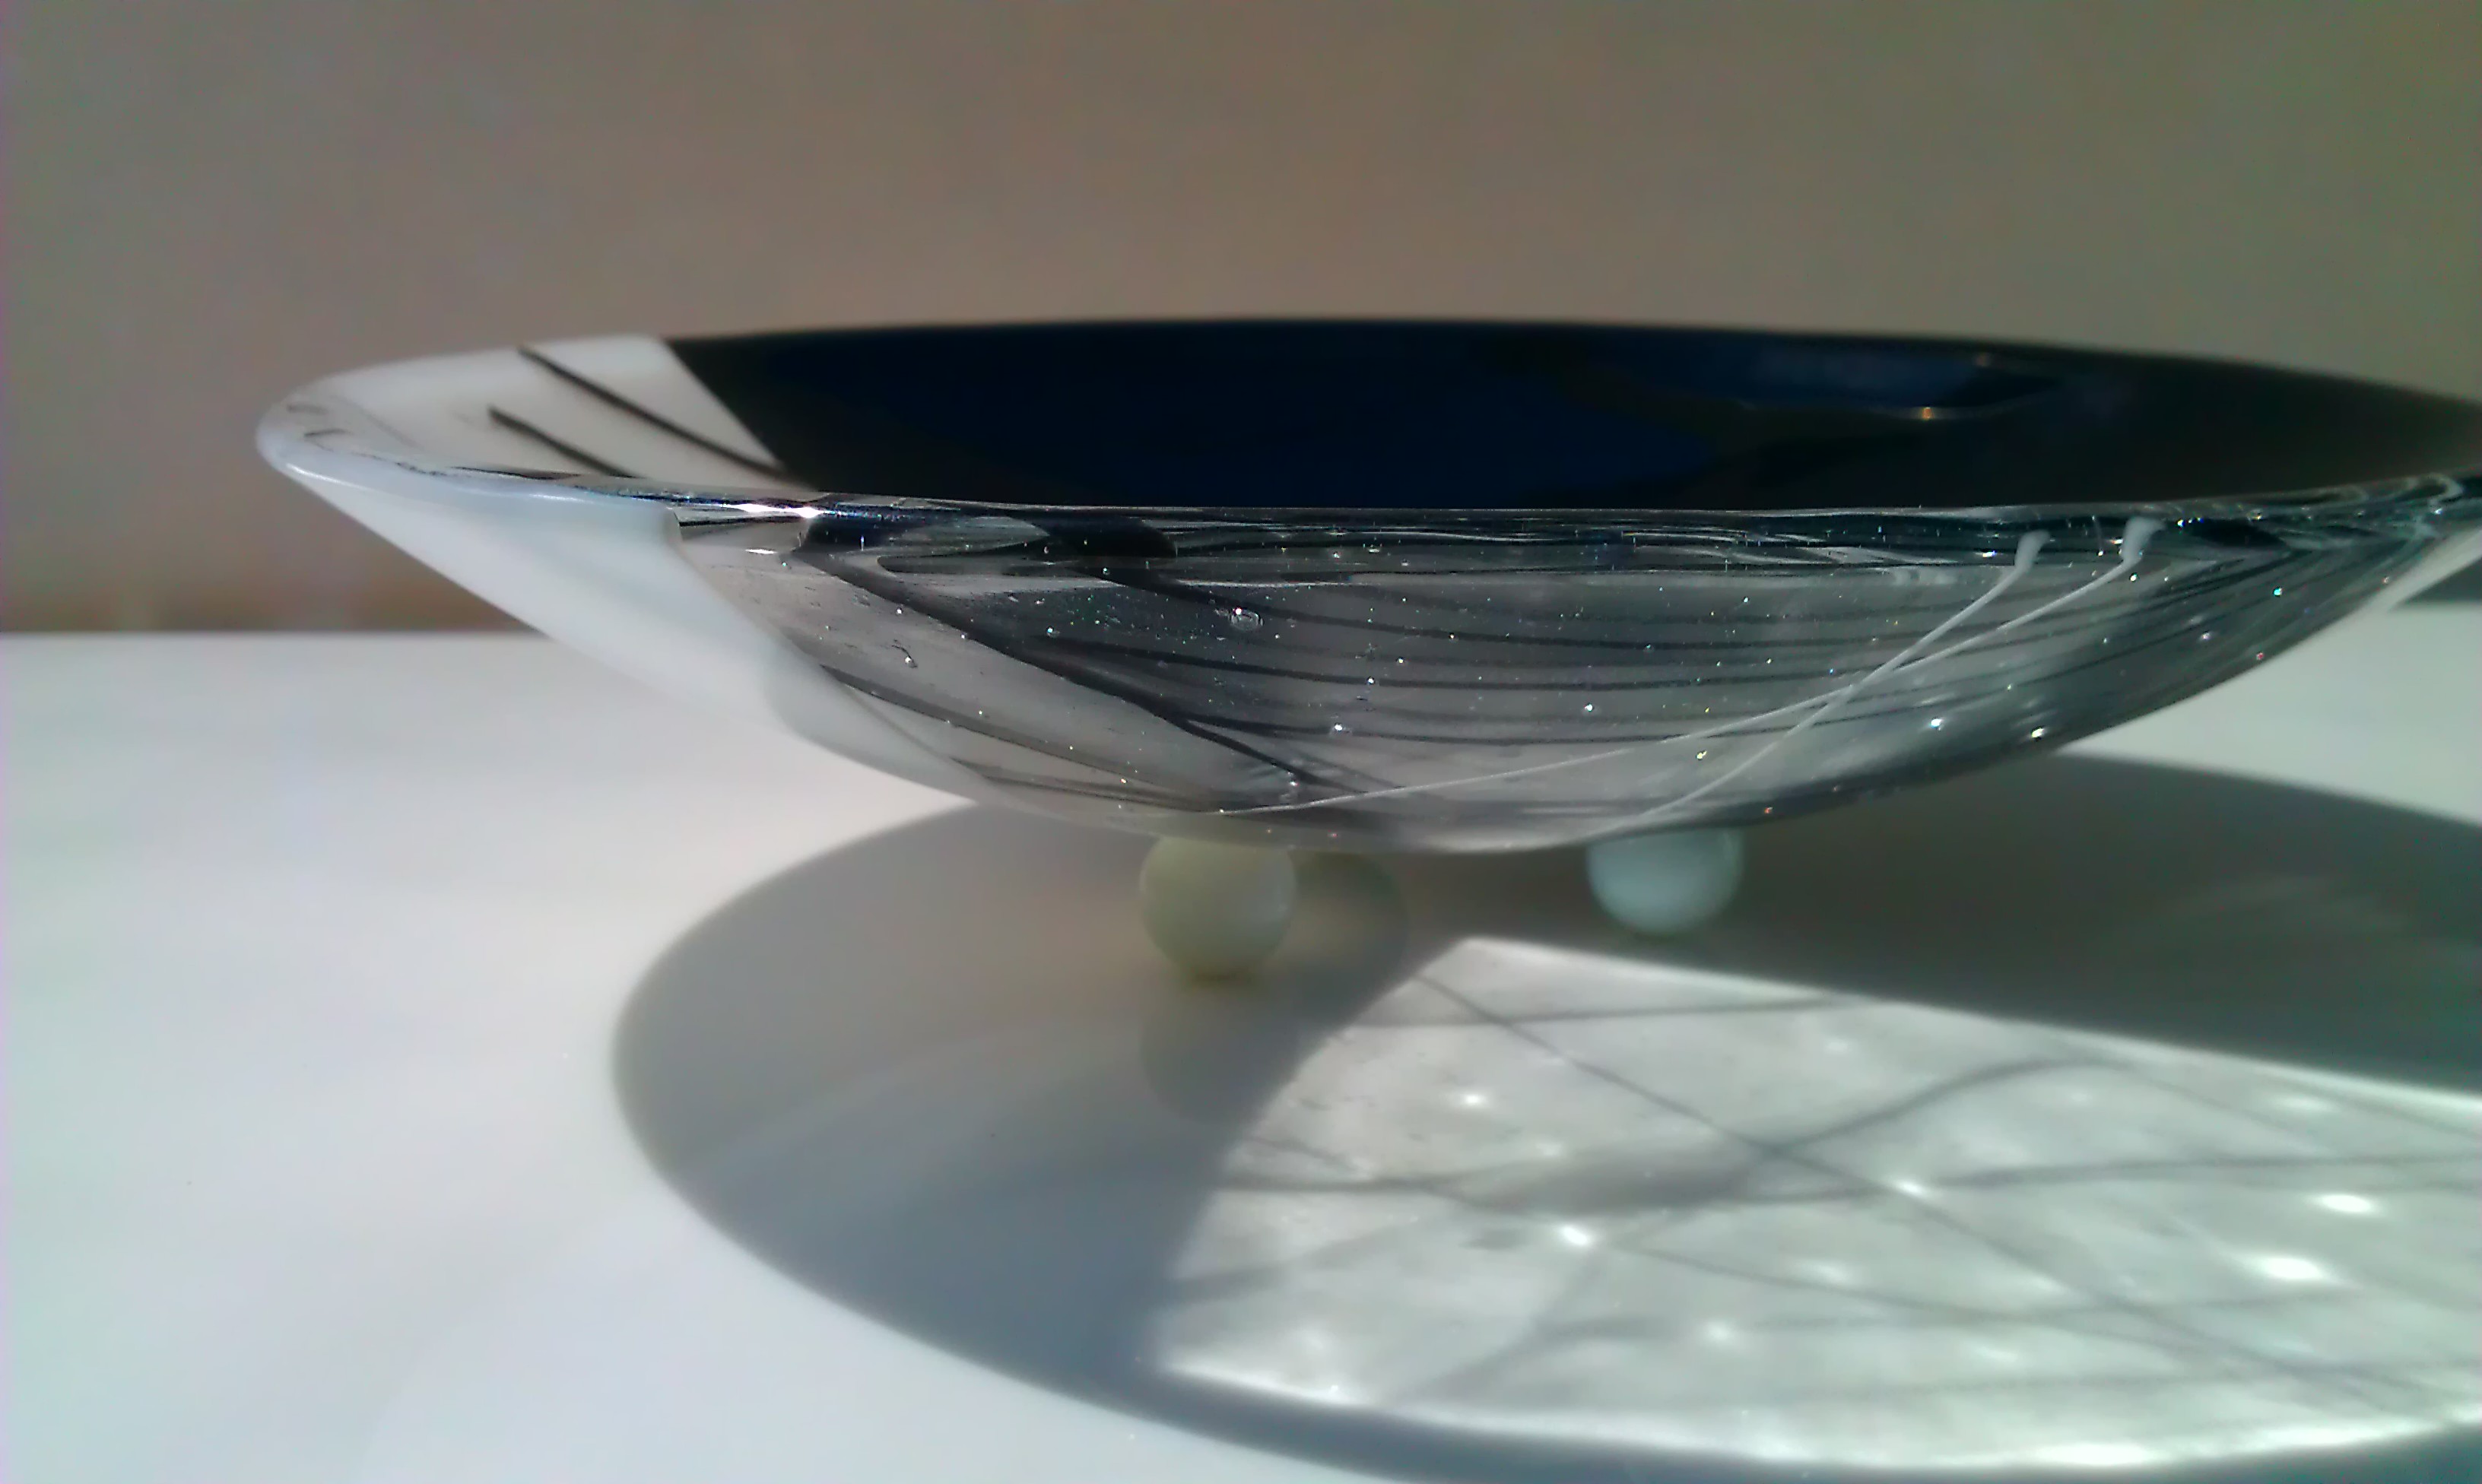 This black and white bowl is footed.  The contrast of white black and clear is striking. The light shines through the clear and reflects the textures in the glass.  